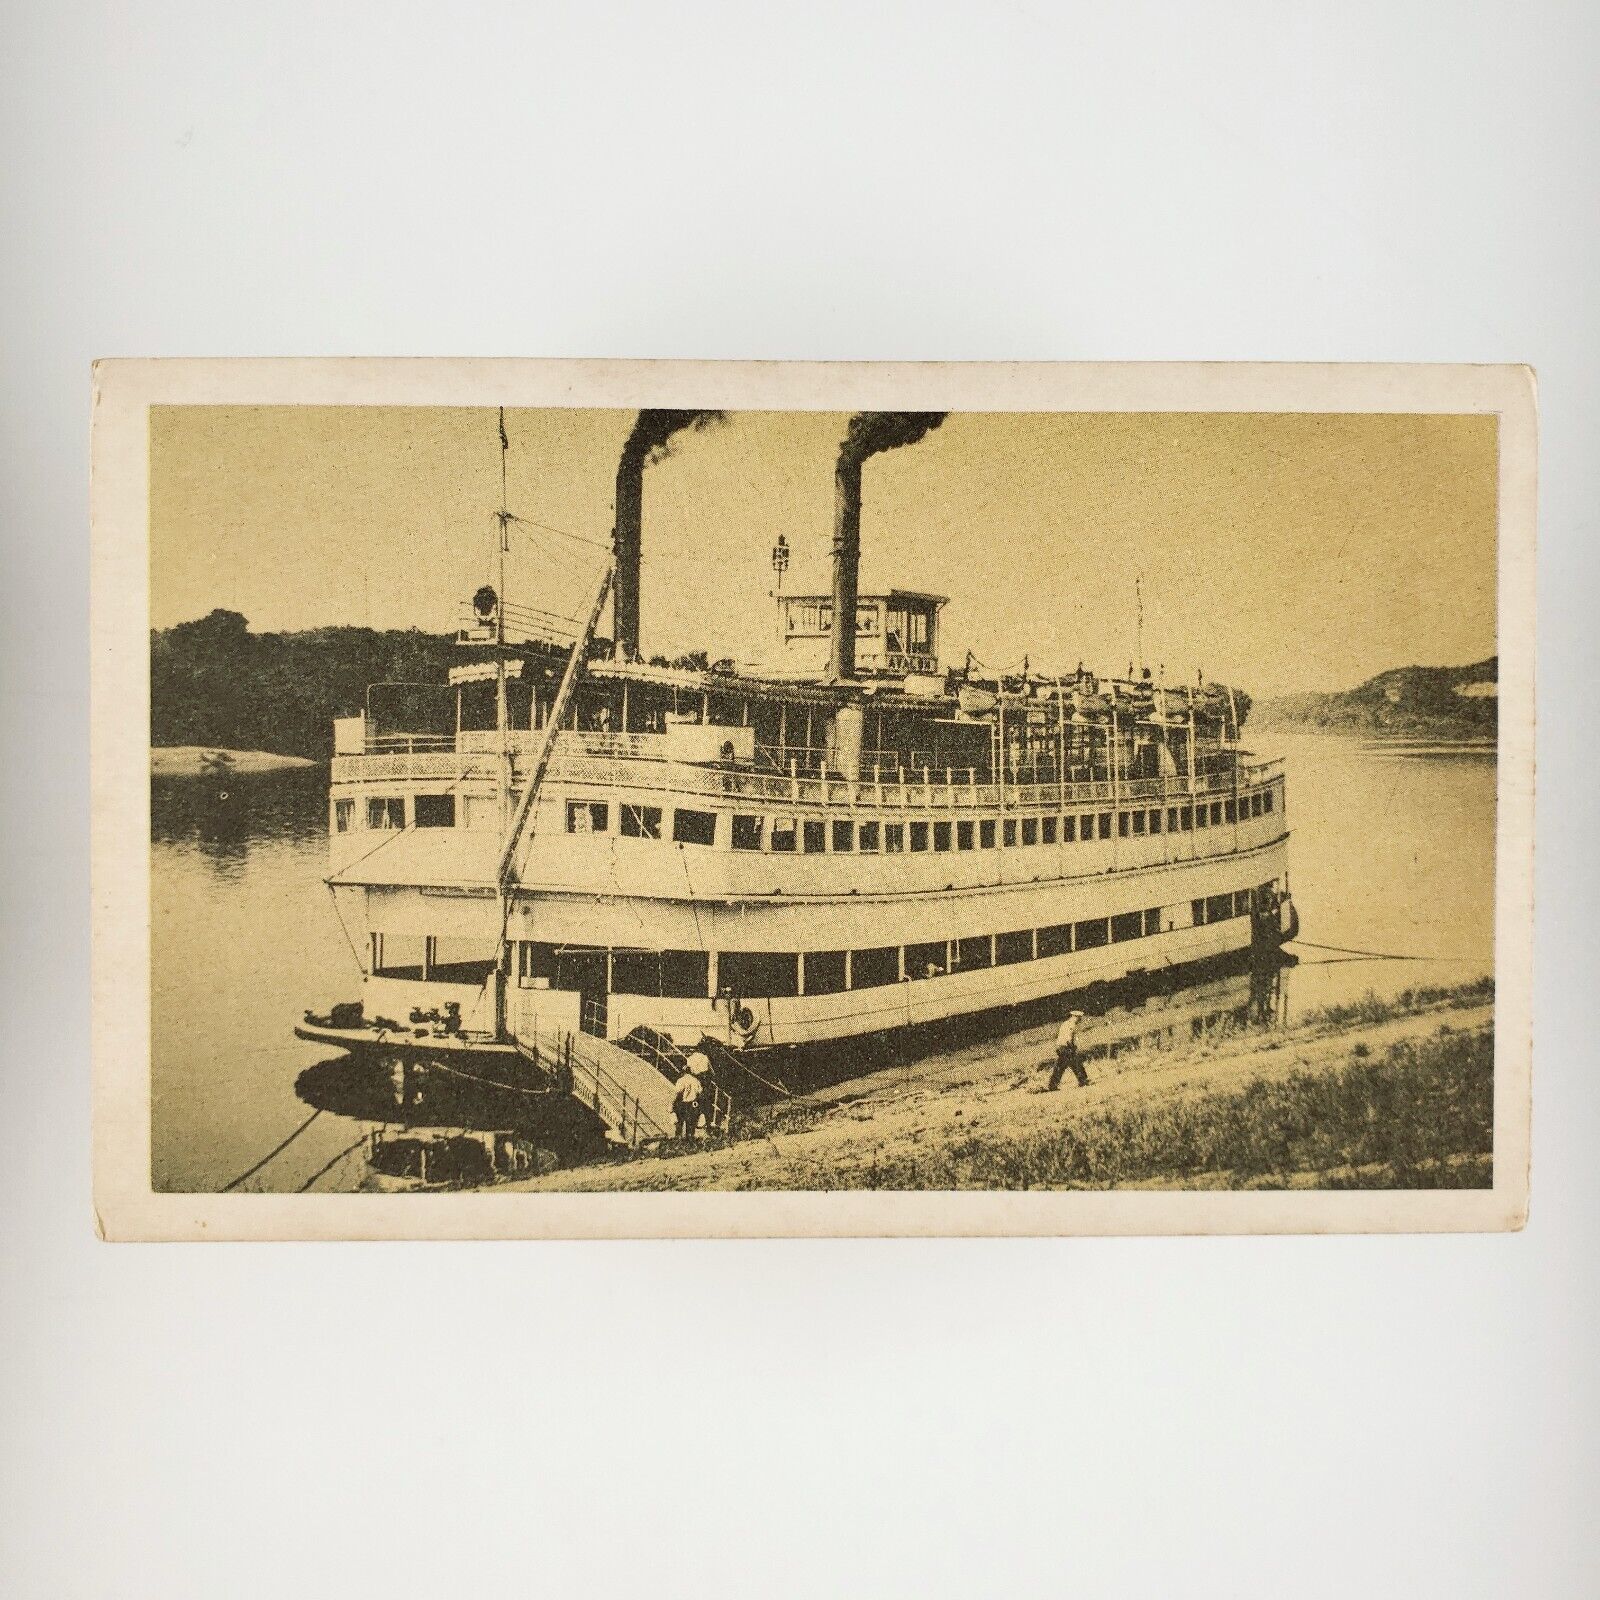 Avalon Steamboat Mississippi River Card 1920s Captain Frederick Way Boat A3017